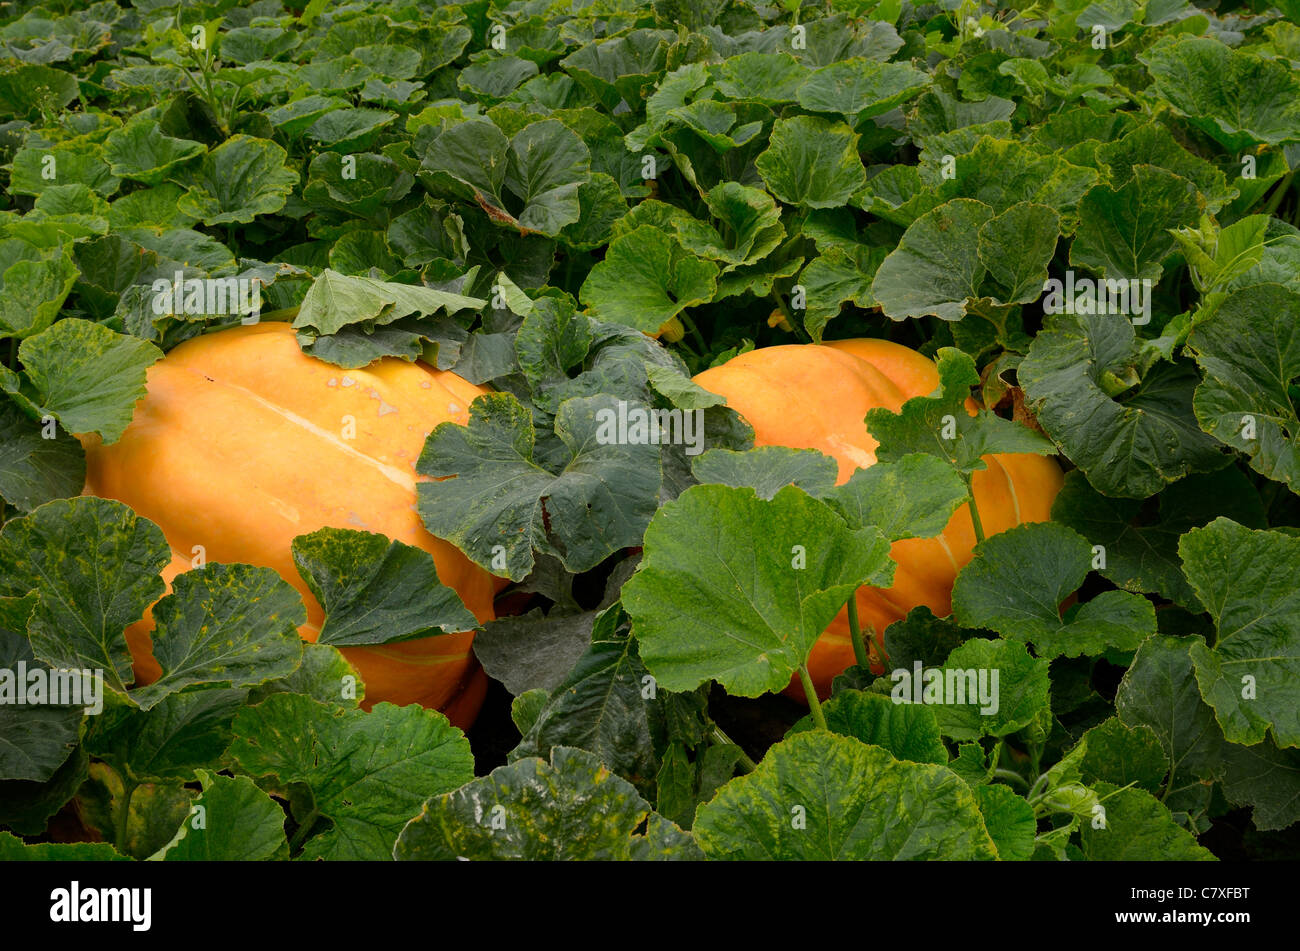 Atlantic giant pumpkins in a vegetable garden in the Fall Holland Marsh Ontairo Stock Photo